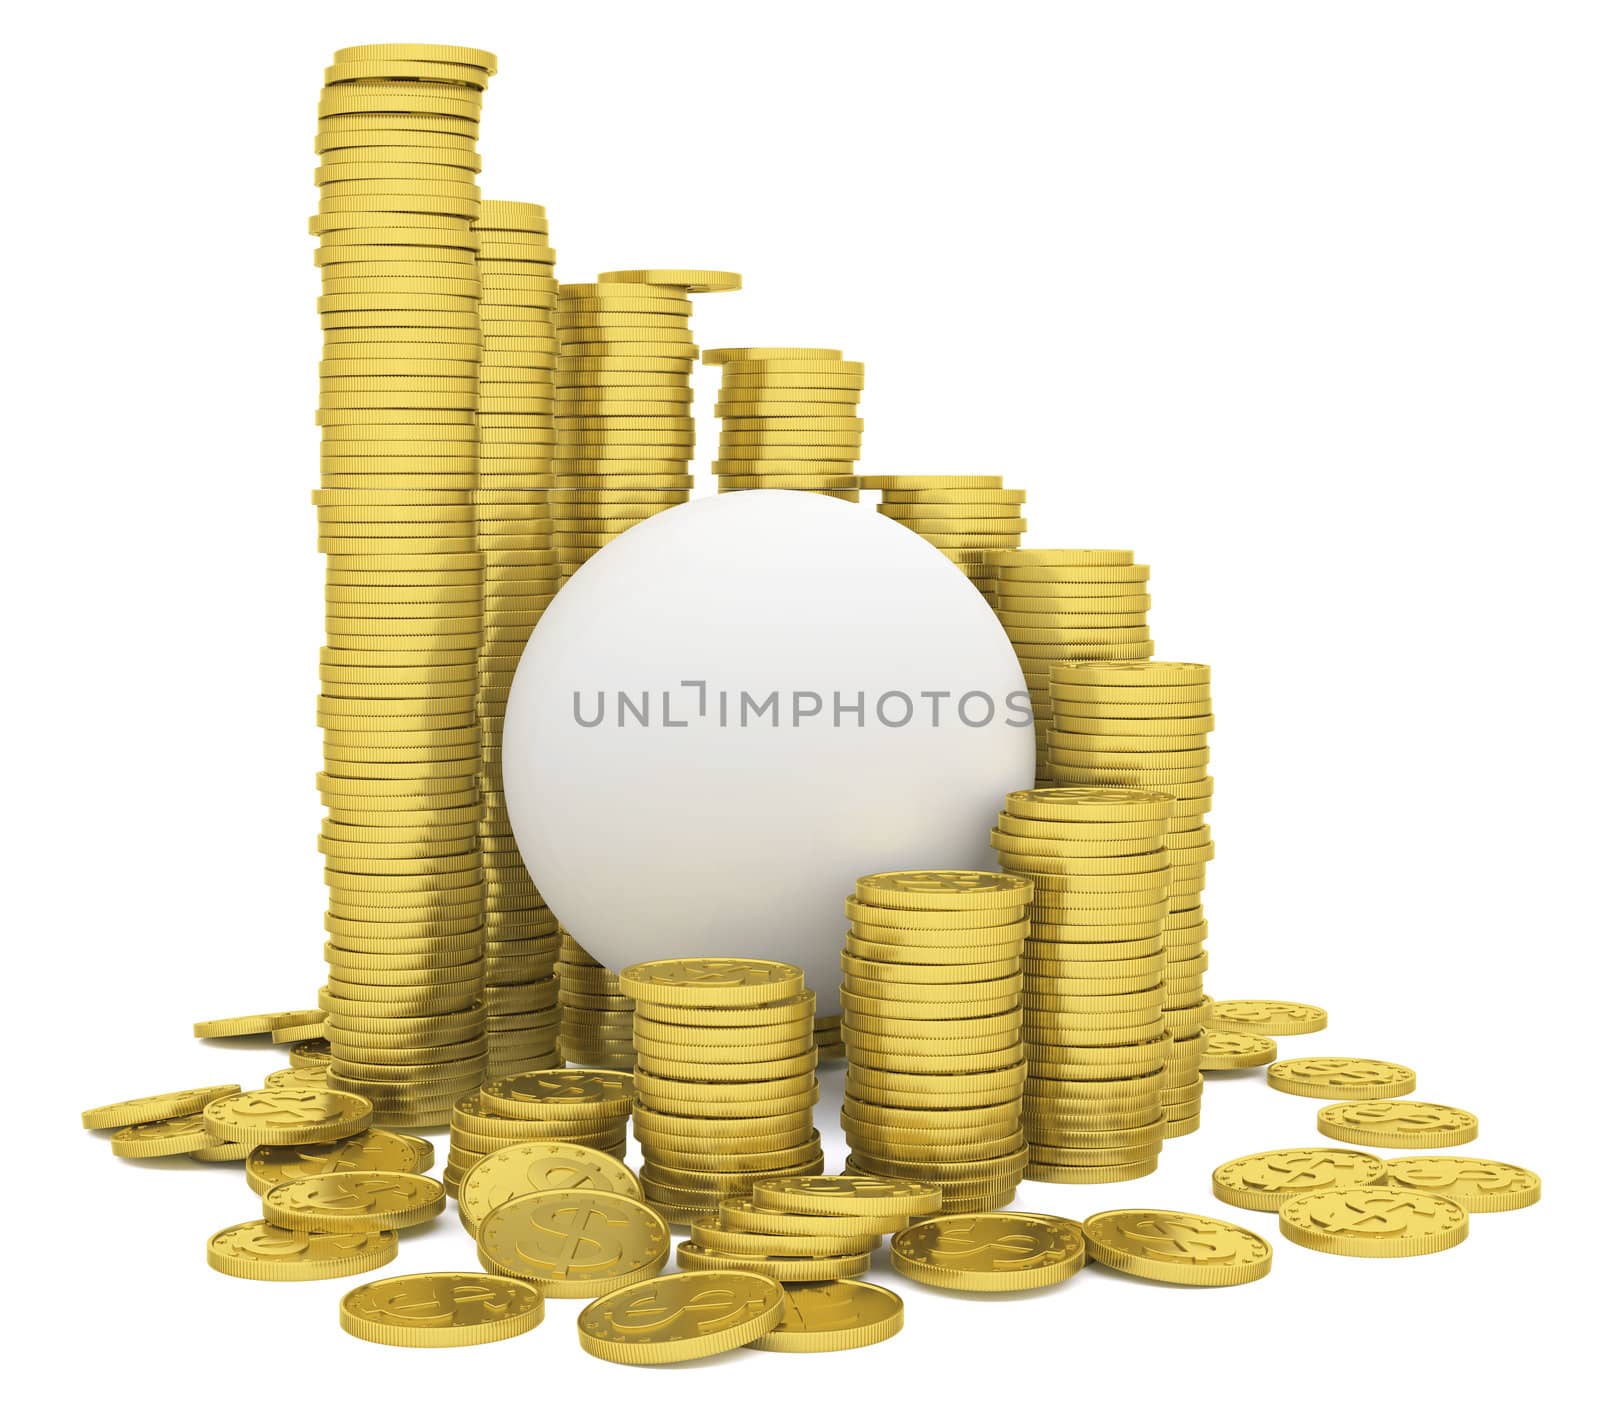 Sphere inside a stack of gold coins by cherezoff